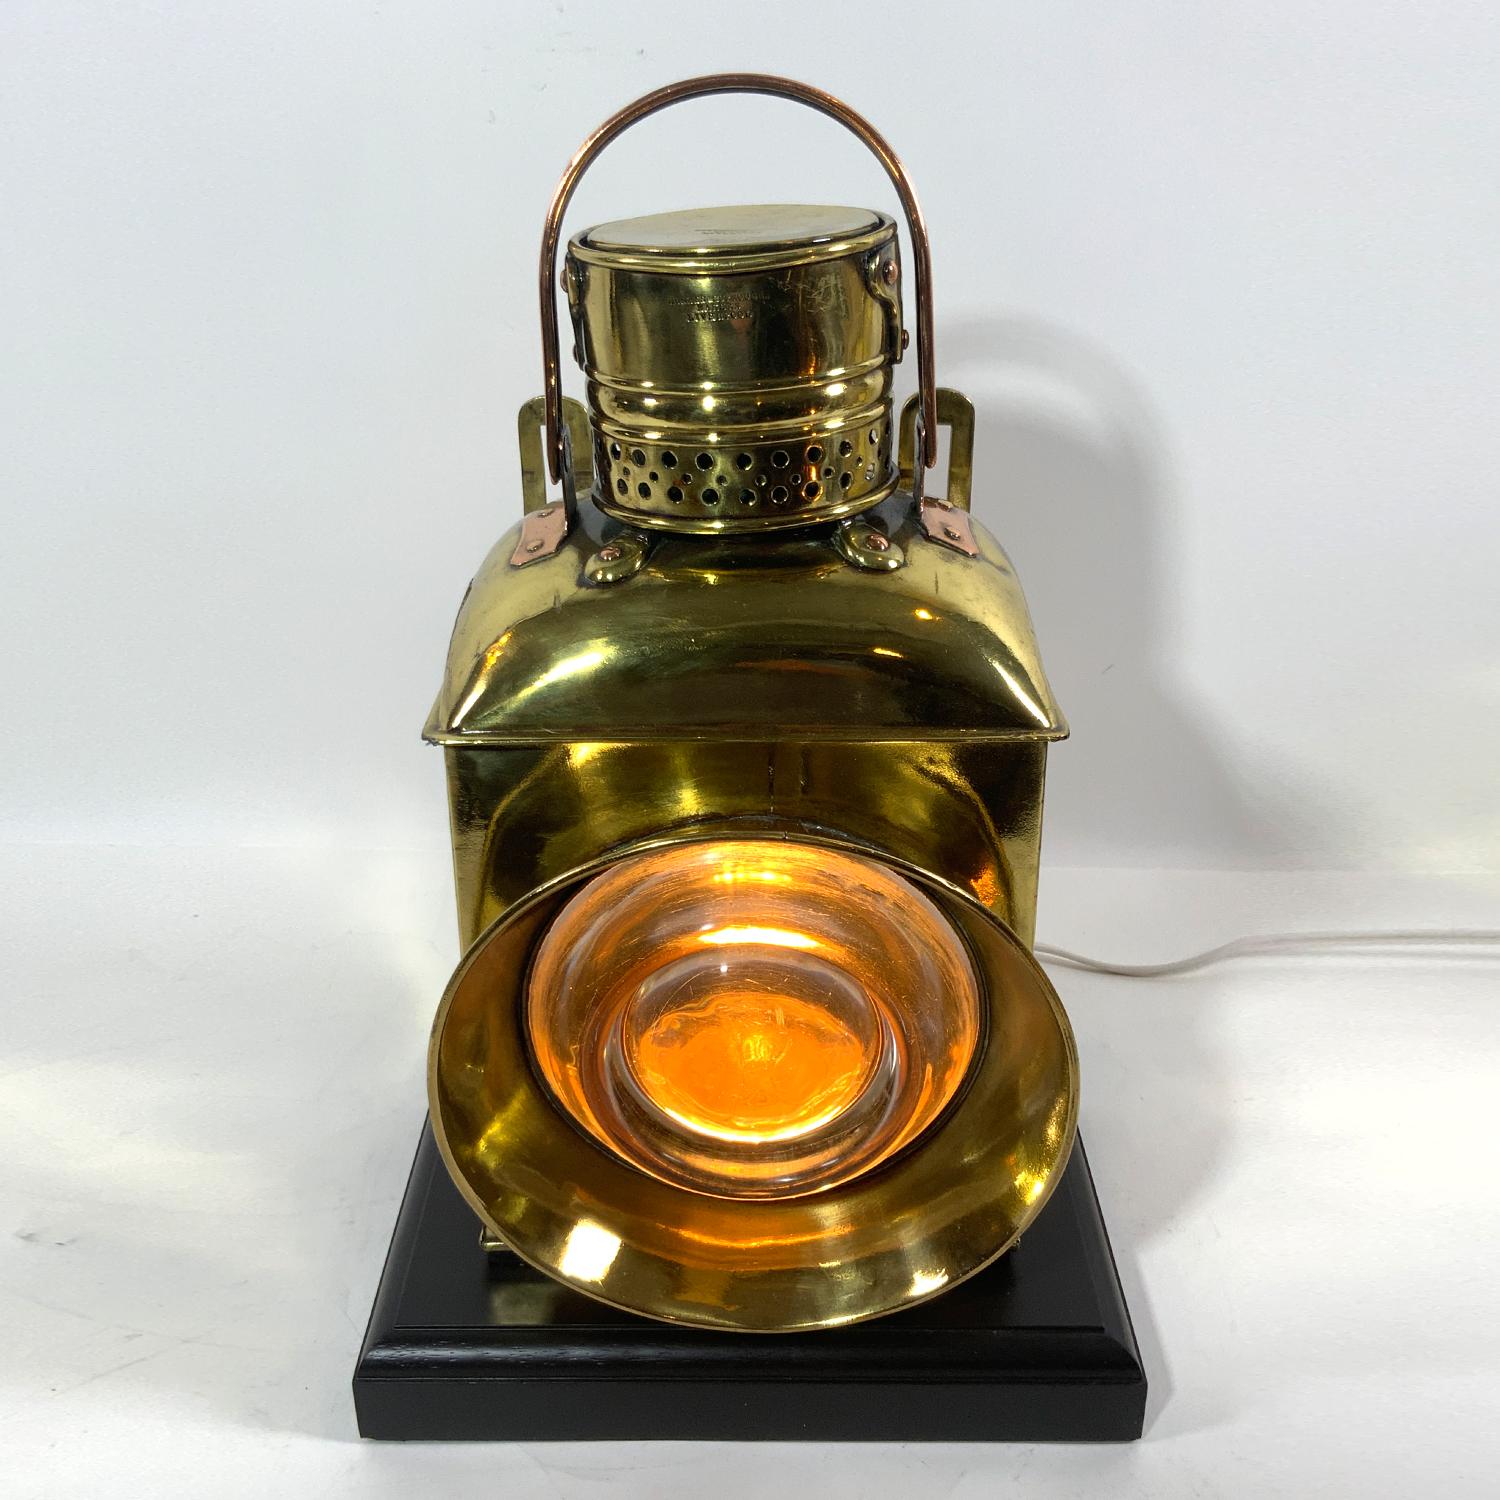 Hughes and Burroughs Lantern with huge dioptric bullseye lens. With mounting brackets, carry handle. Fitted with electric socket for home use. Cap is engraved 